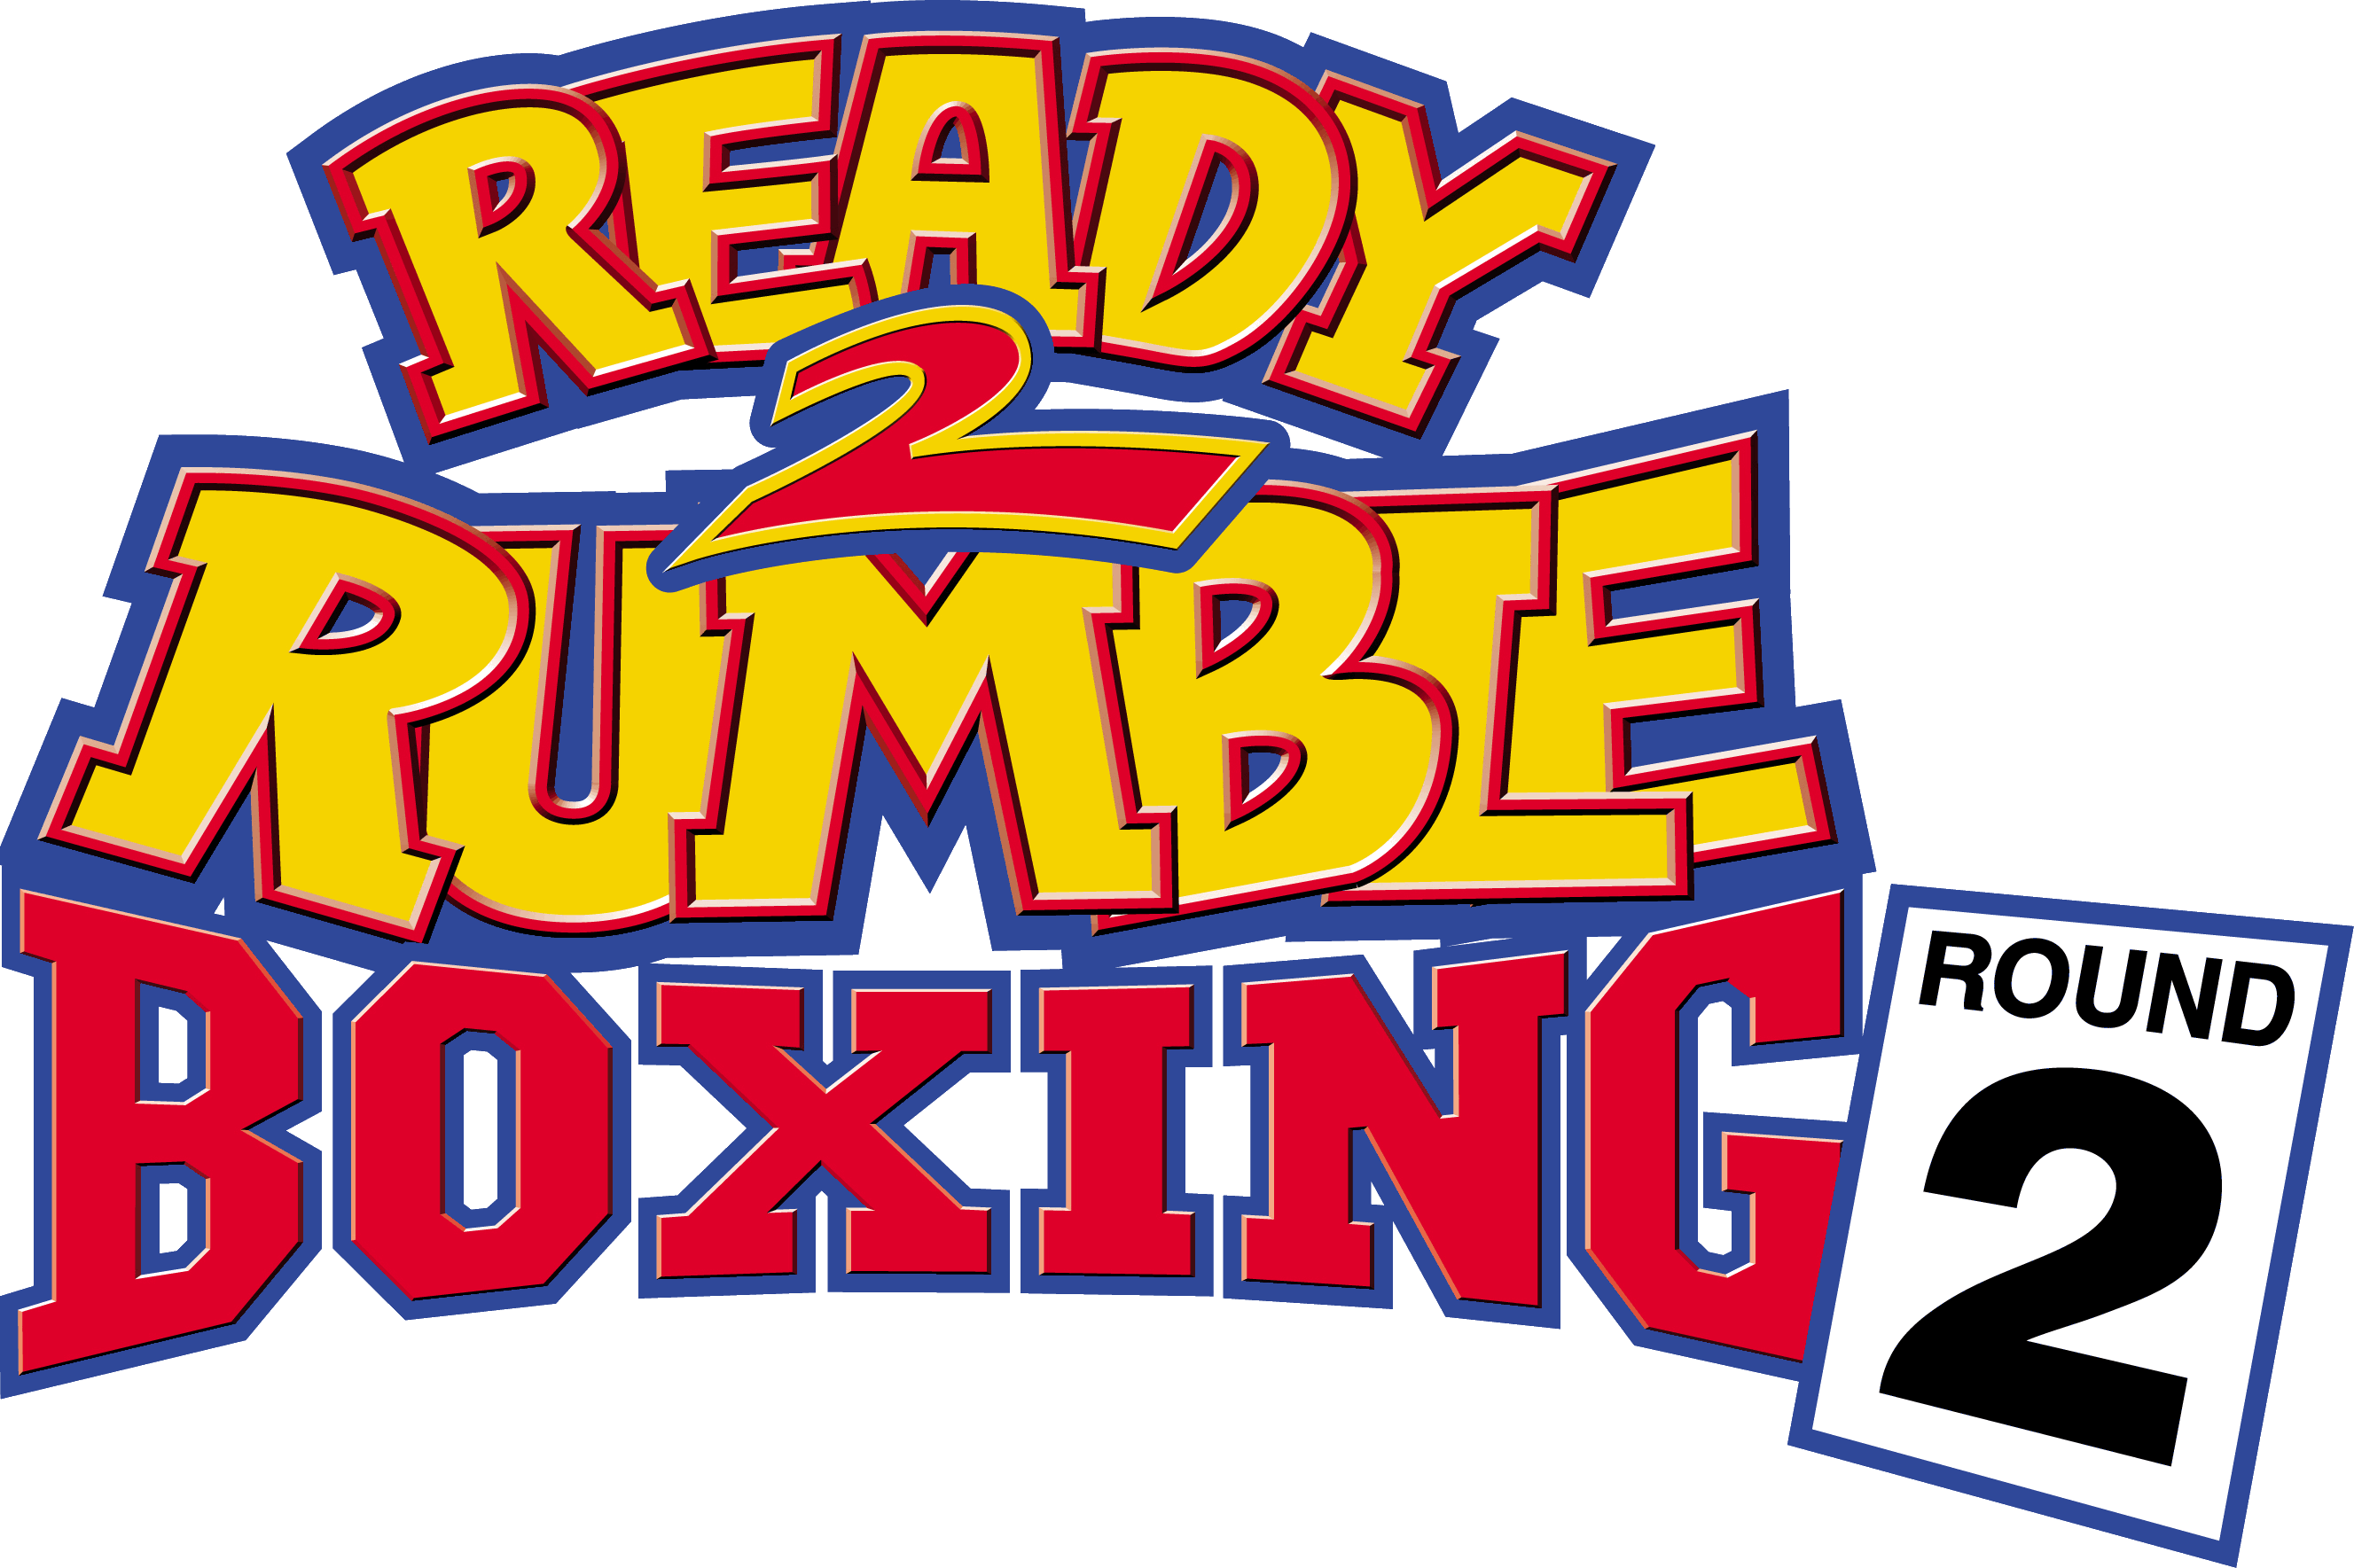 Ready 2 Rumble Boxing: Round 2. Ready 2 Rumble Boxing: Round 2 ps2. Ready 2 Rumble Boxing ps1. Ready 2 Rumble Boxing Round 2 ps1 русская psxplanet. Mine 2 the ready